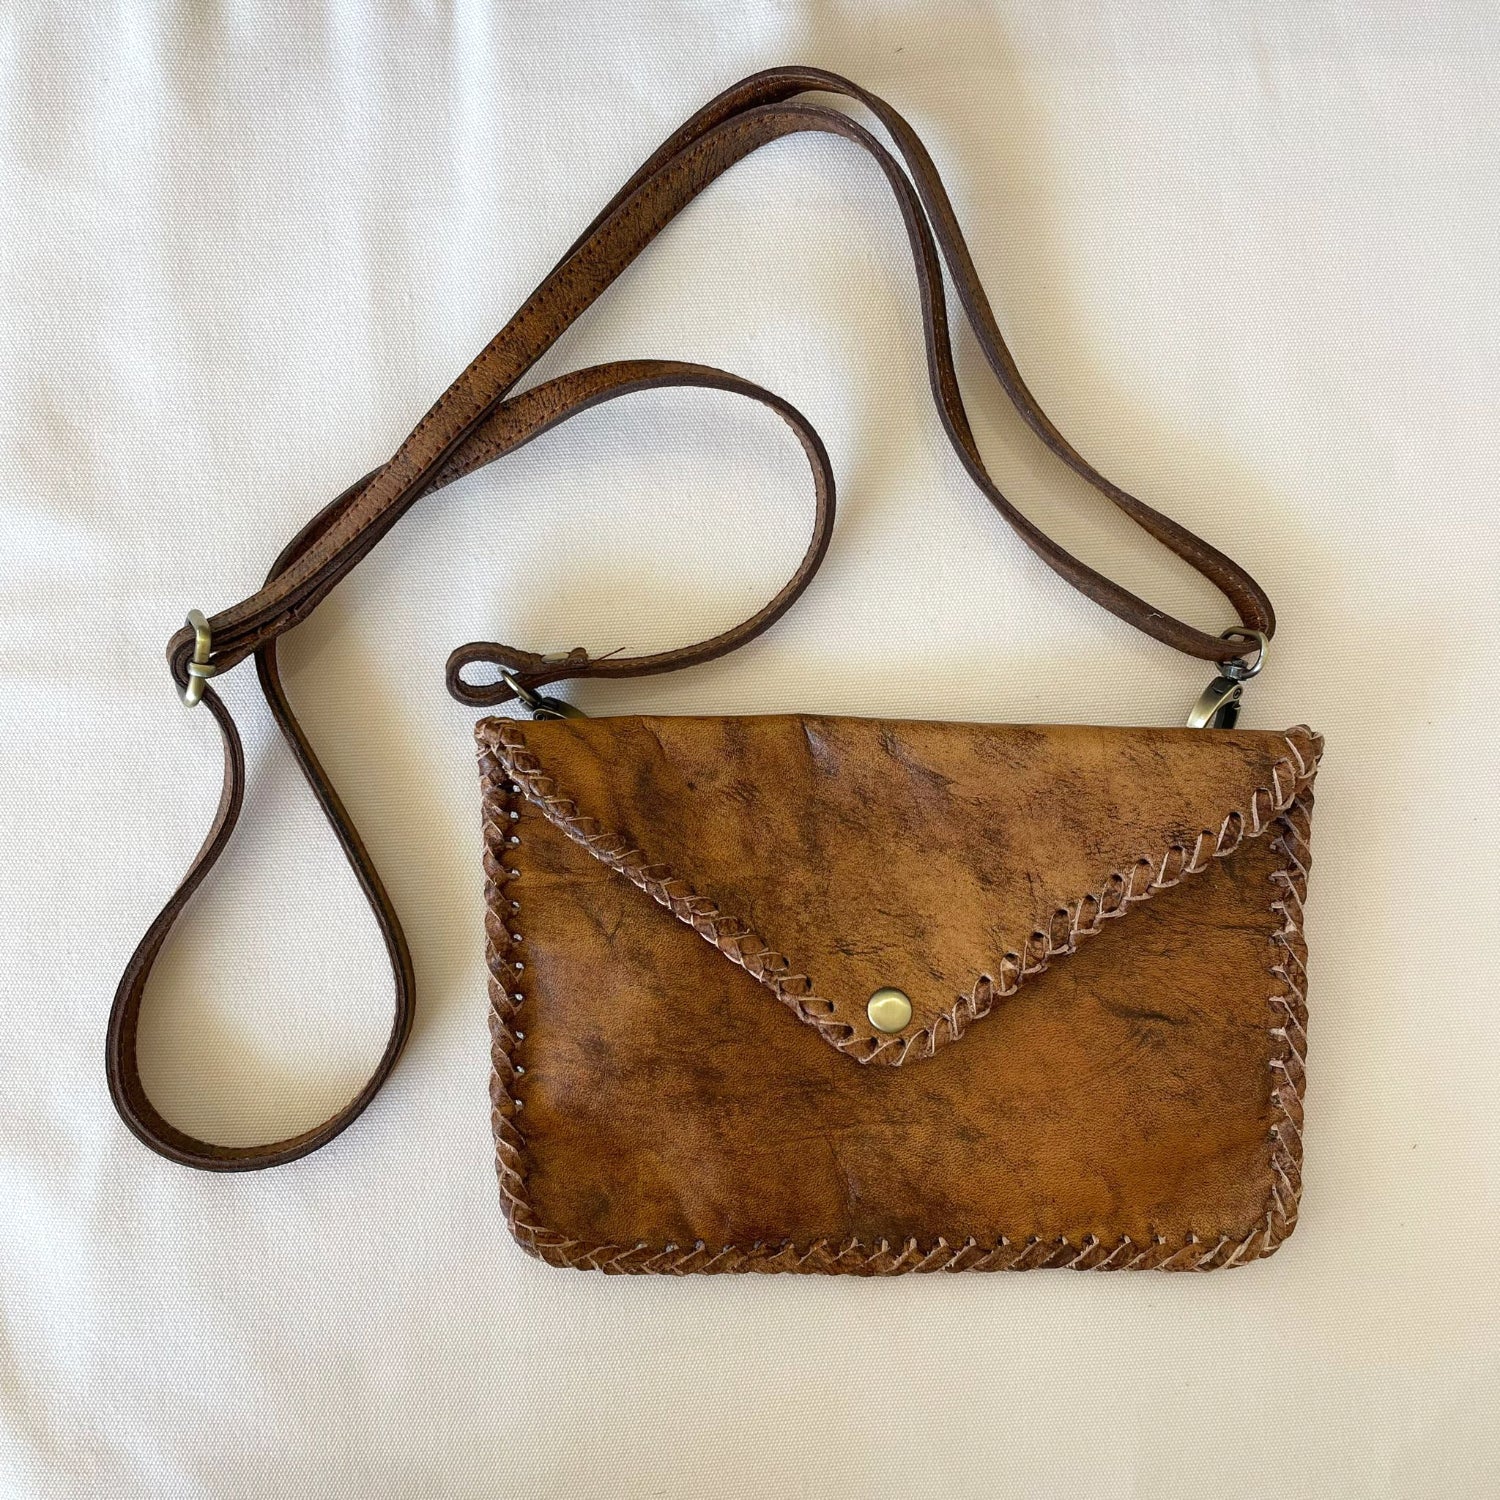 Tan Braided Mottled Leather Clutch/Bag